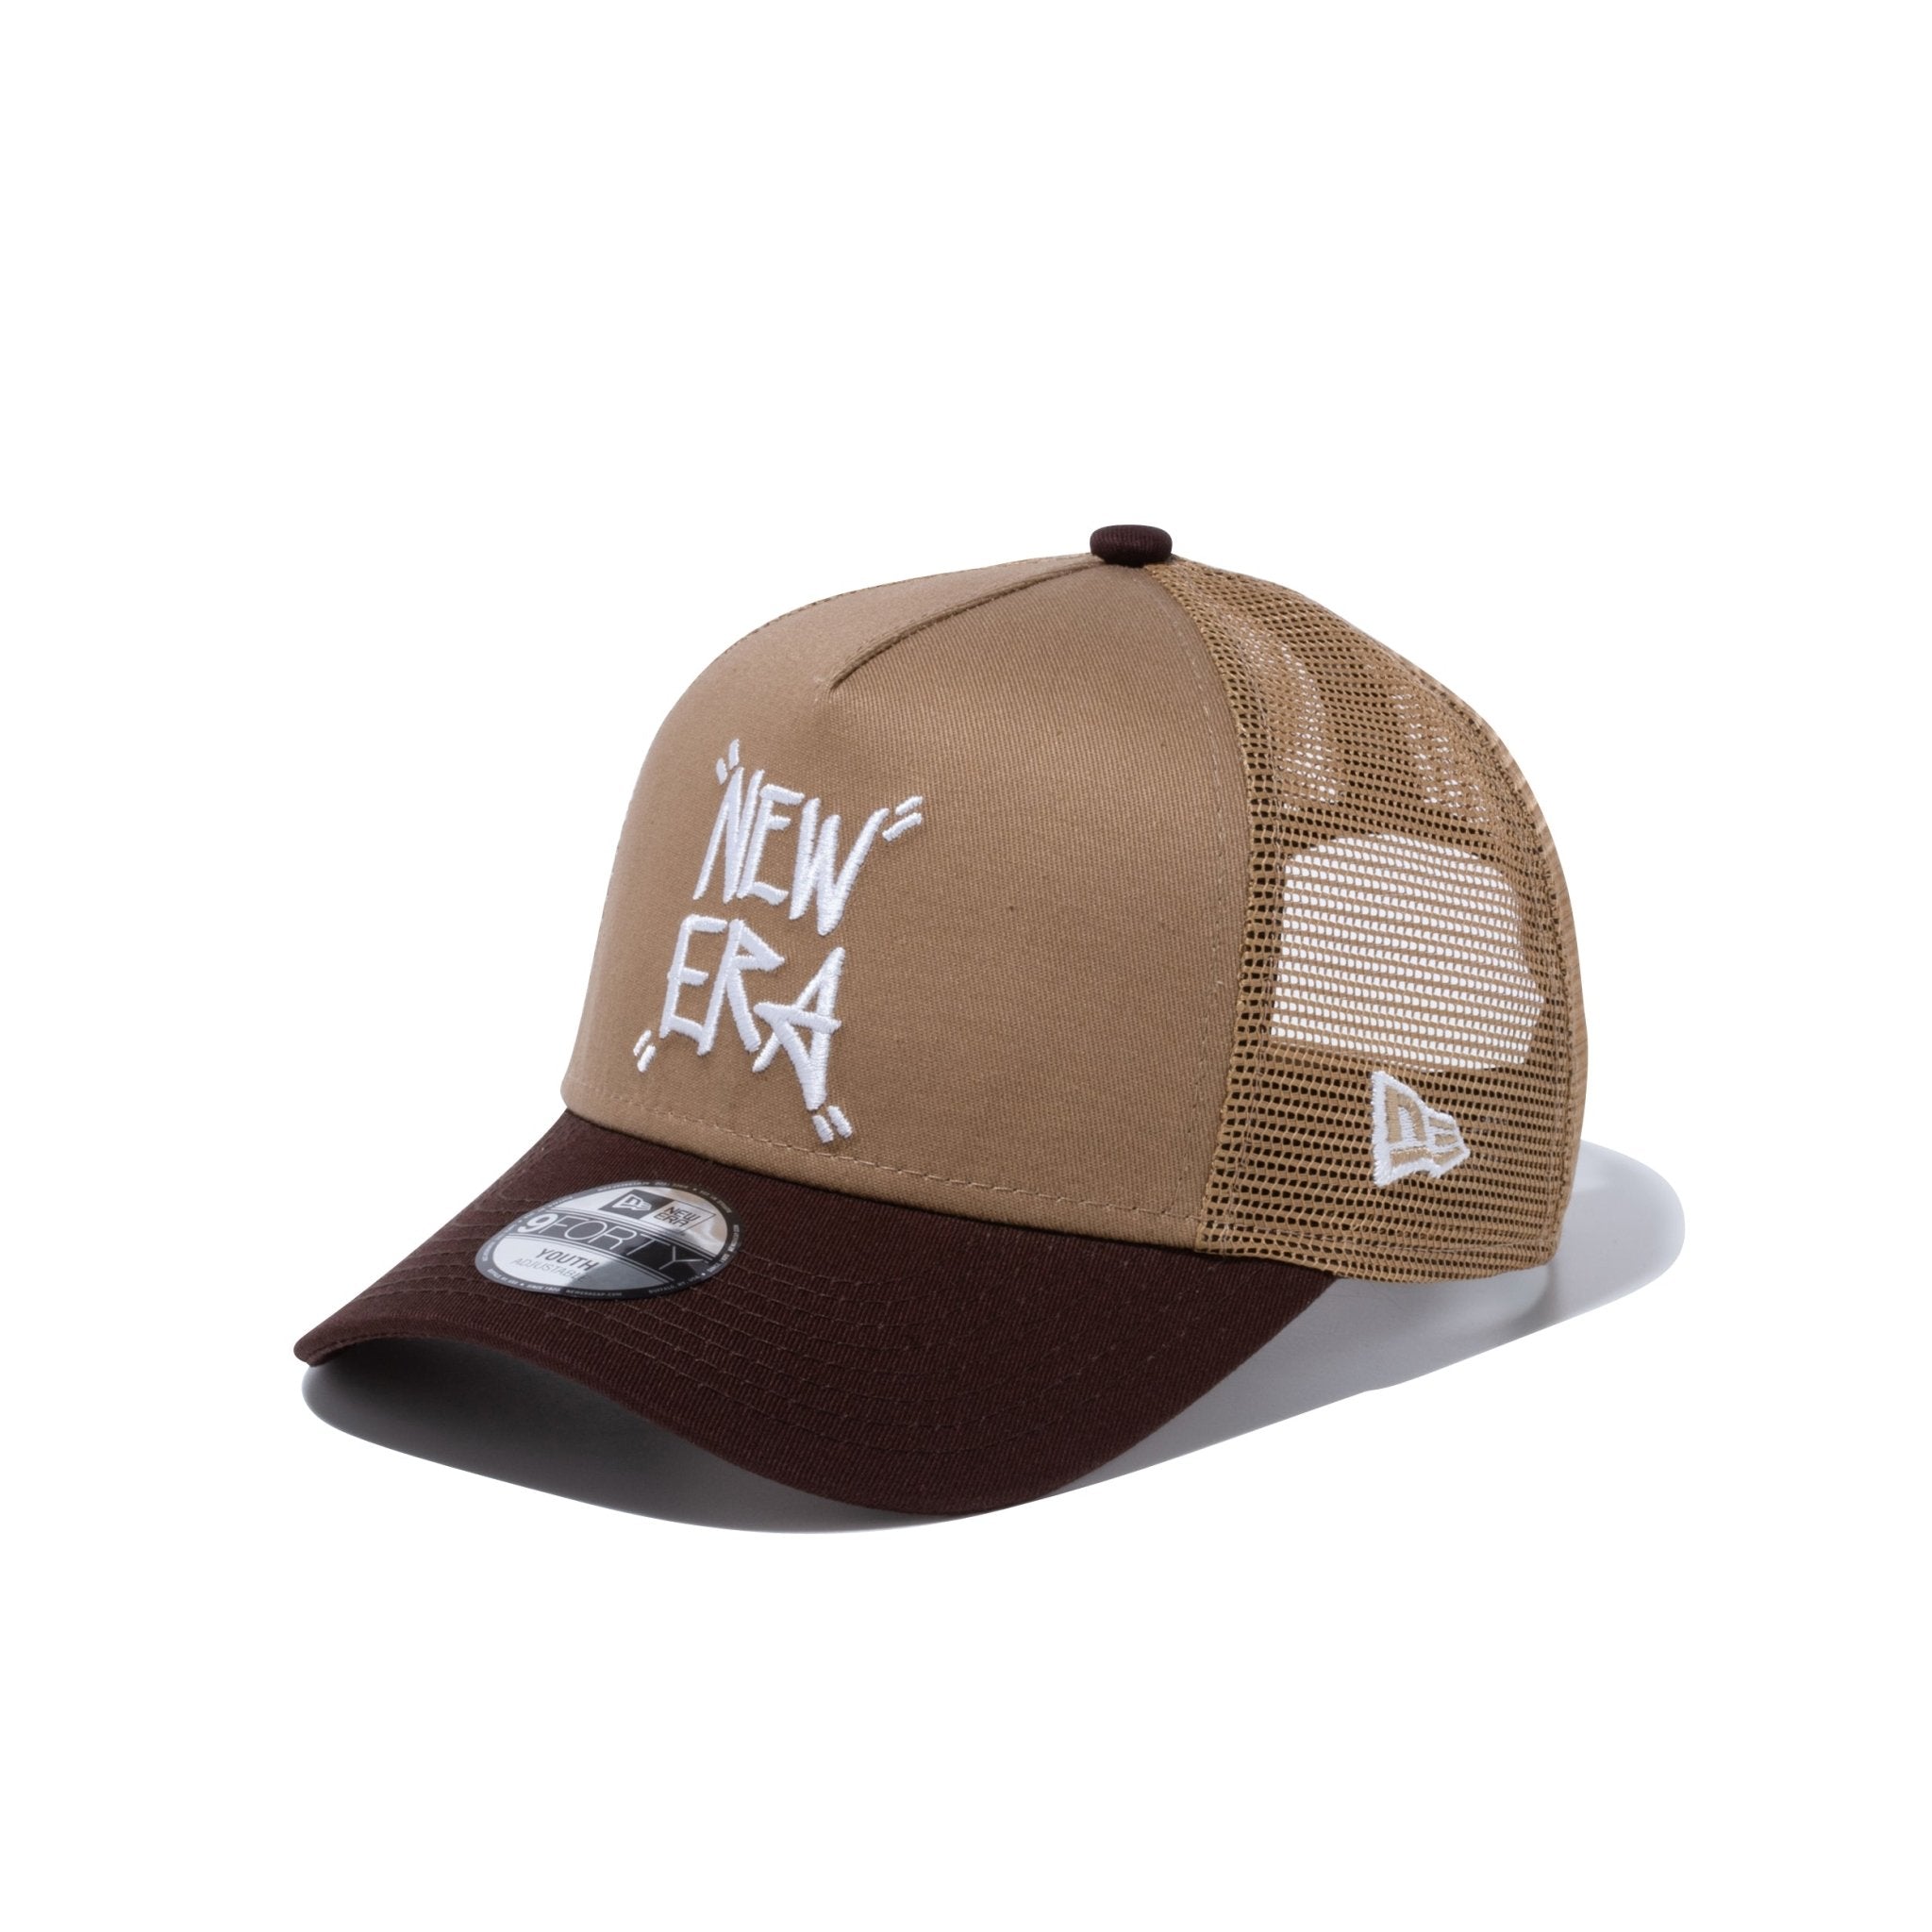 Youth 9FORTY A-Frame トラッカー Tagging NEW ERA カーキ